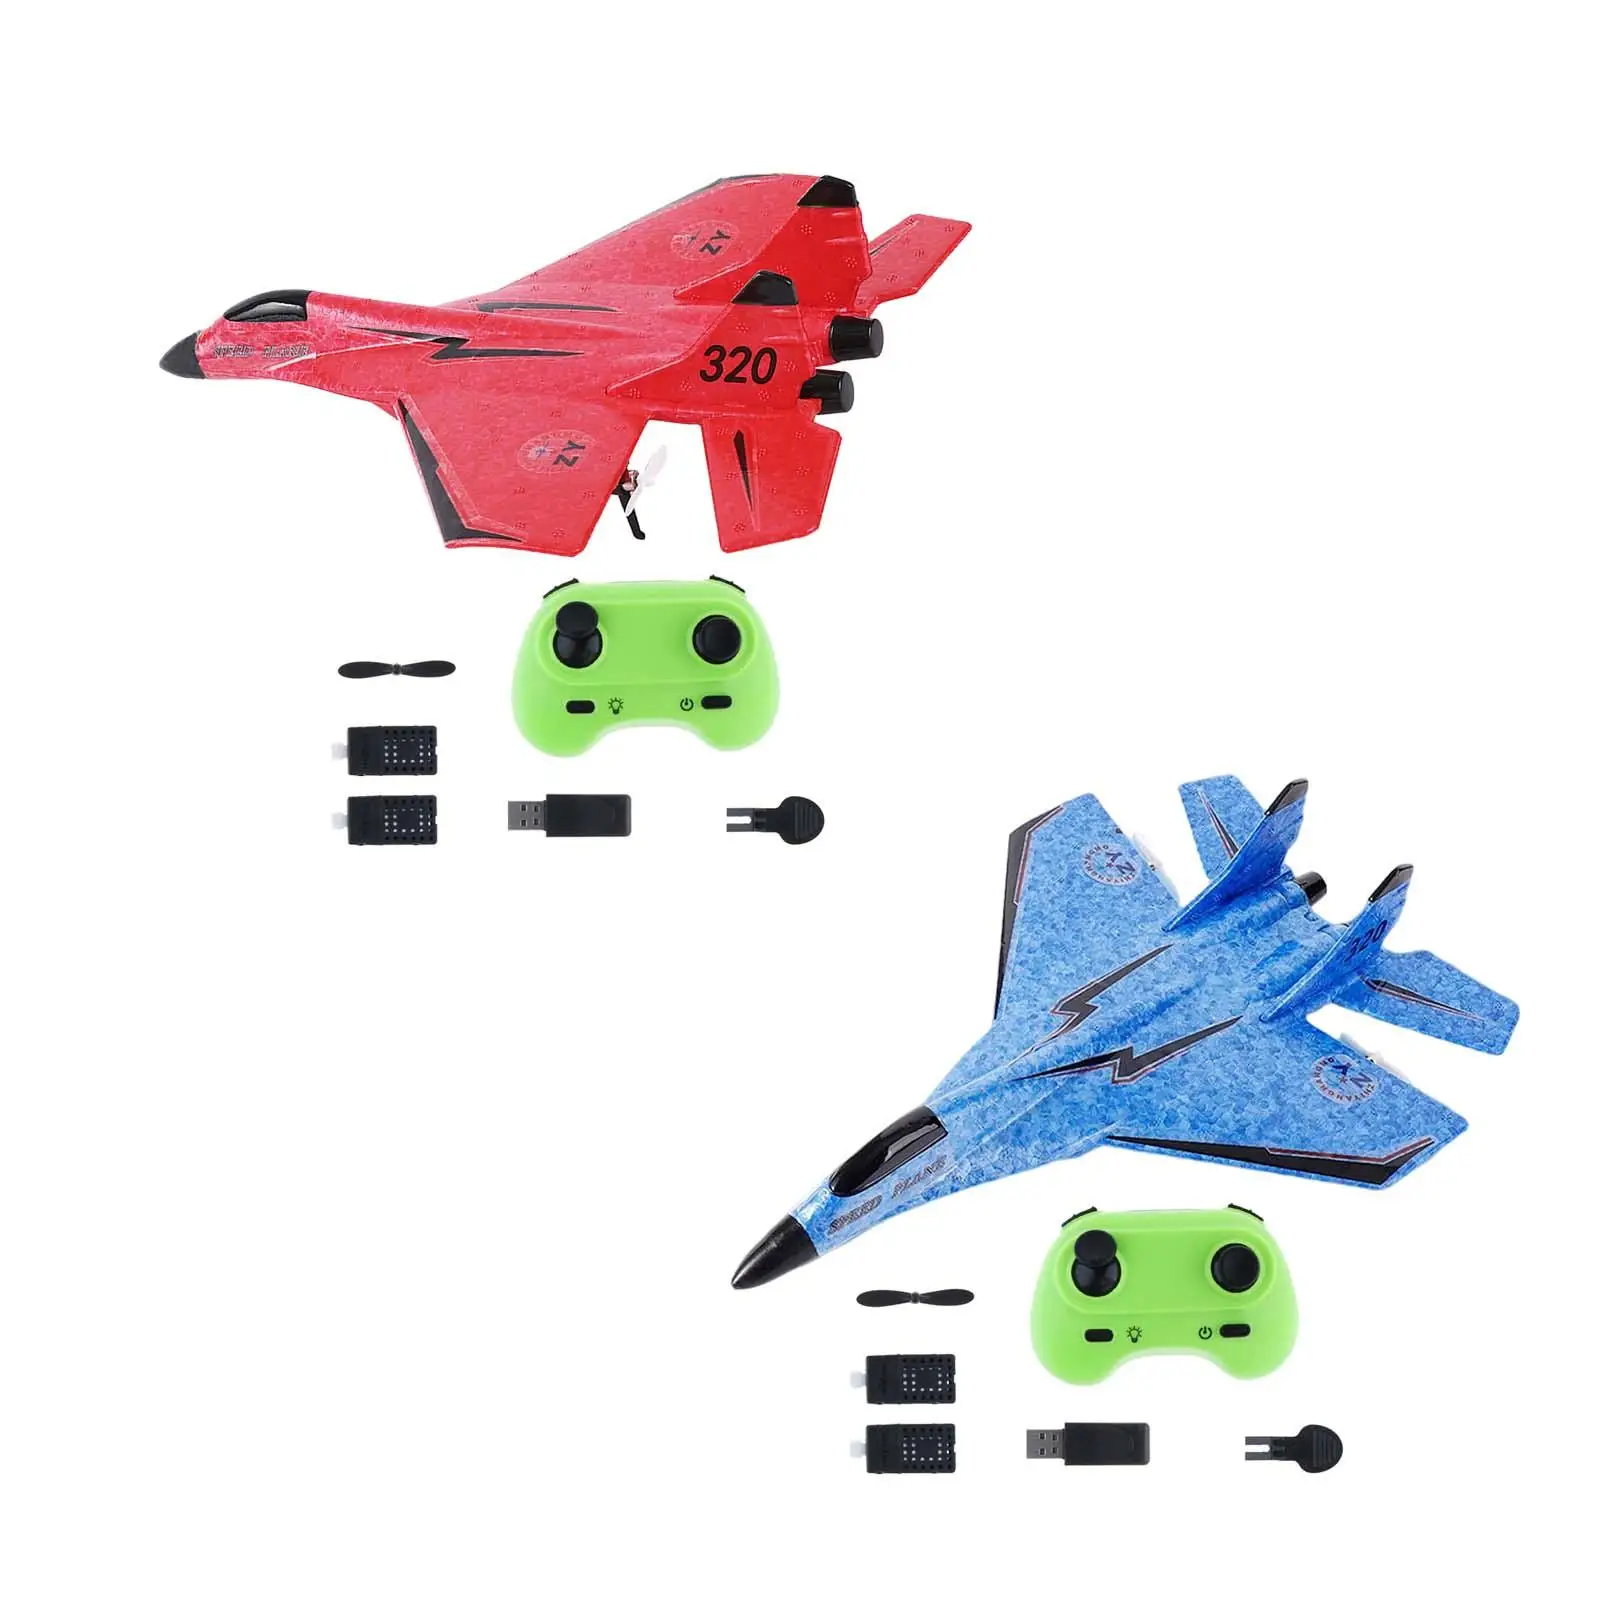 RC Plane Lightweight Easy to Fly Gift with LED Cool Light 2.4G 2 Channel RC Glider Jet Fighter Toy Aircraft Model for Adults